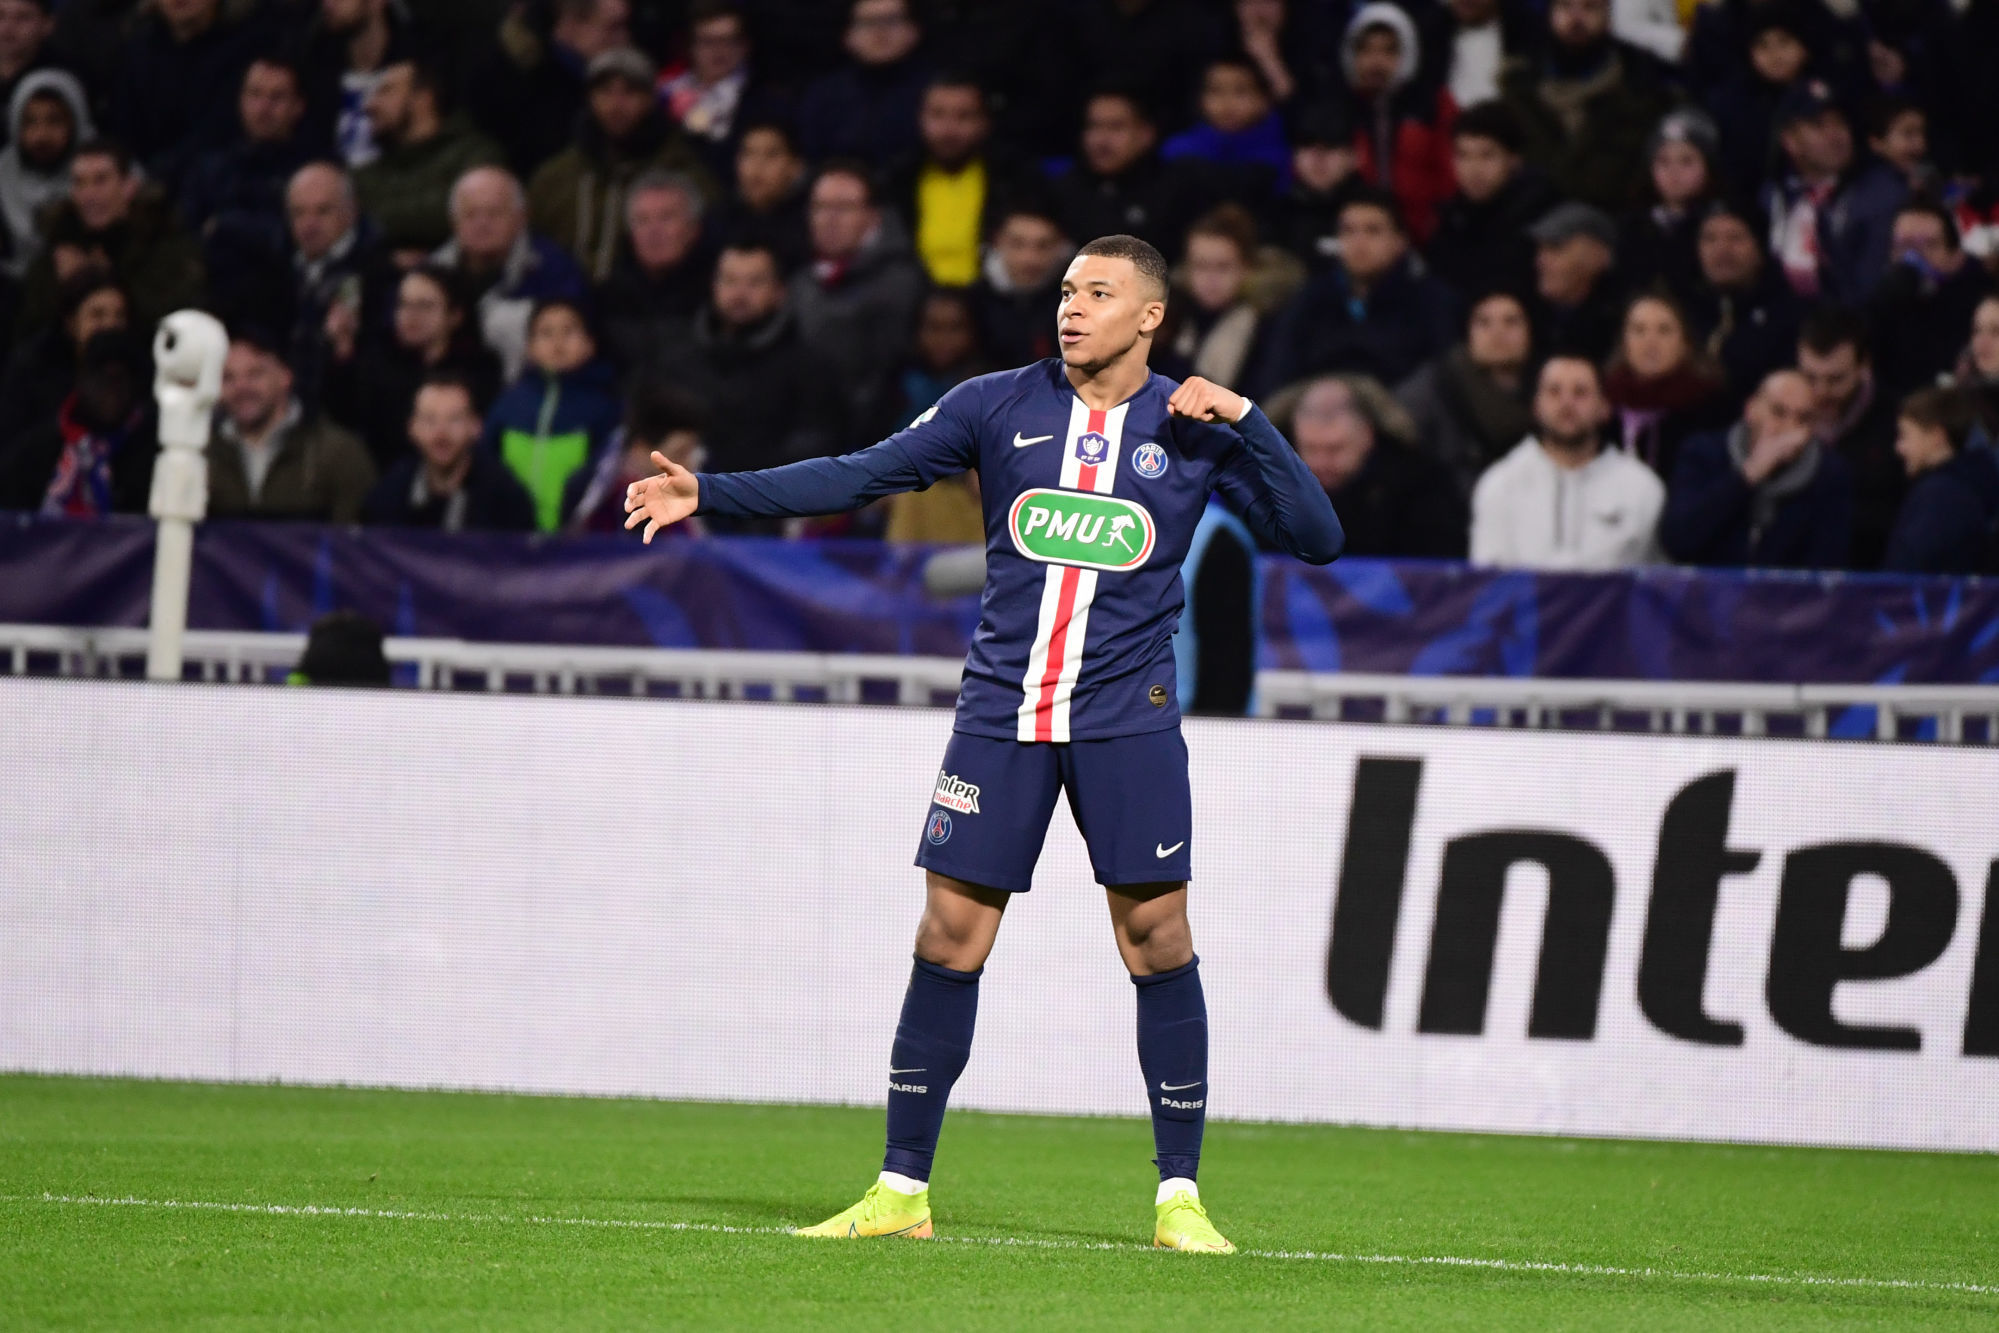 Joy for Kylian MBAPPE of PSG as he puts his side 3-1 ahead during the French Cup semi-final between Olympique Lyonnais and Paris Saint Germain on March 4, 2020 in Lyon, France. (Photo by Dave Winter/Icon Sport) - Kylian MBAPPE - Groupama Stadium - Lyon (France)